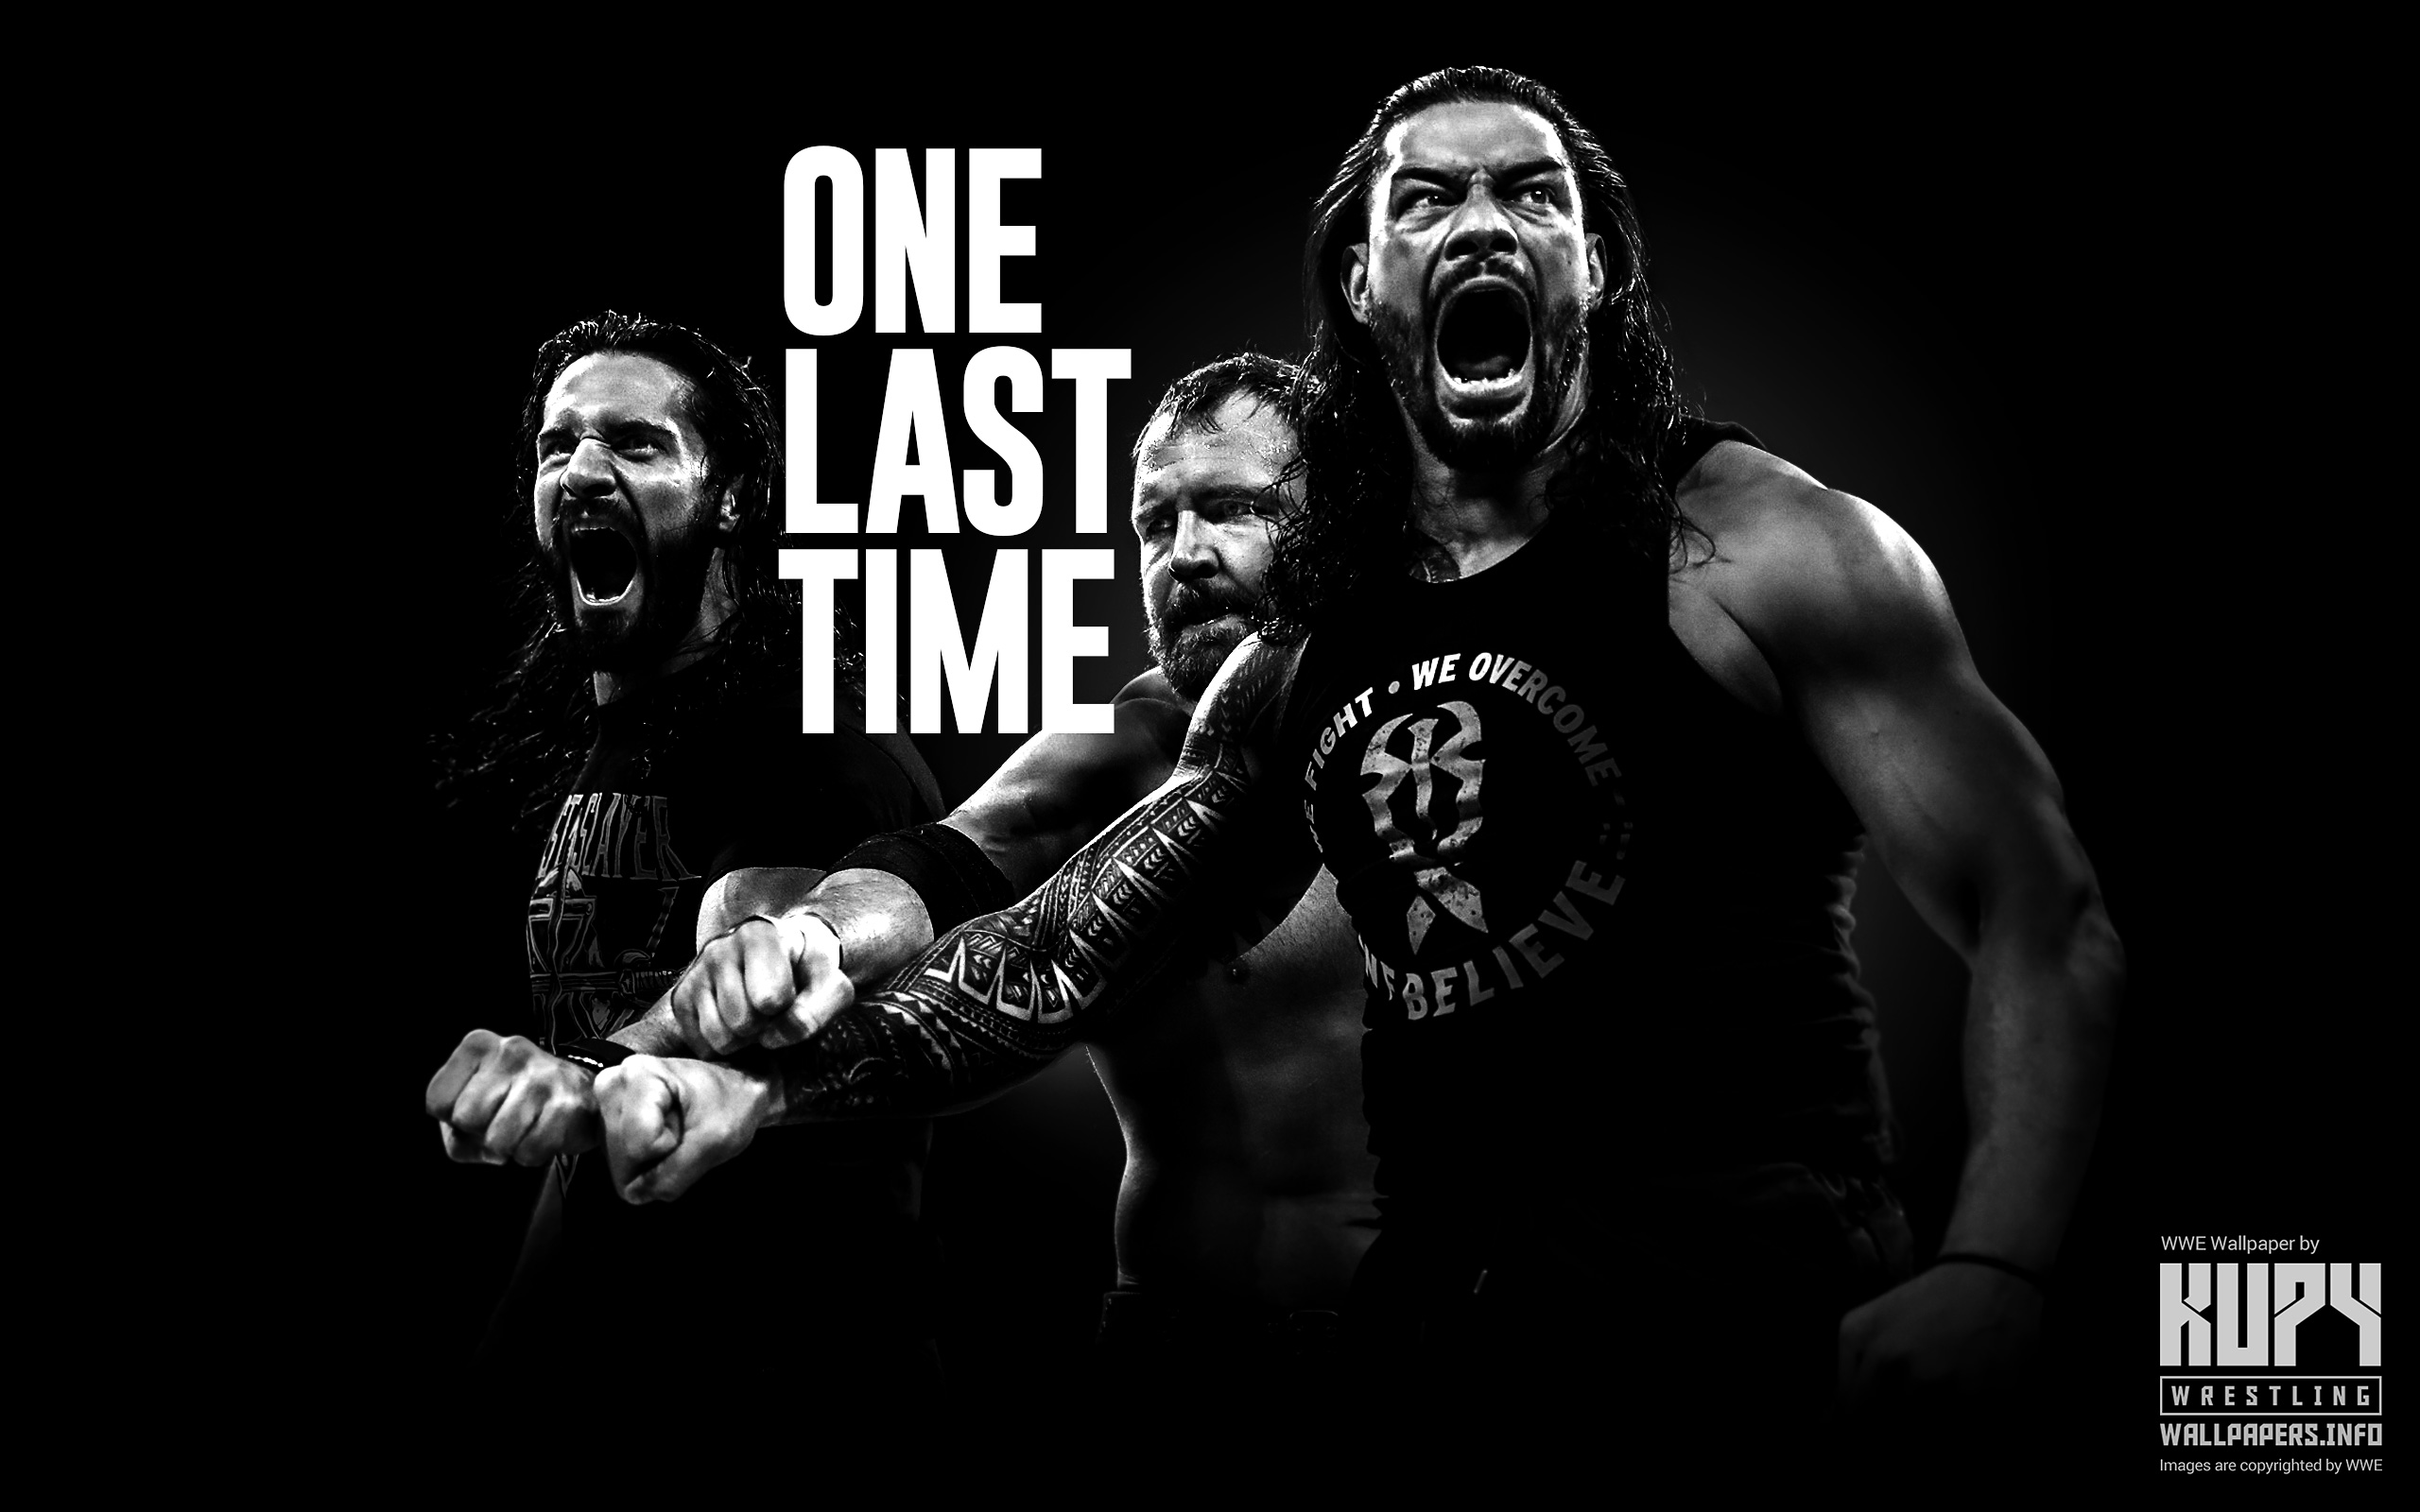 One Last Time The Shield wallpaper   Kupy Wrestling Wallpapers